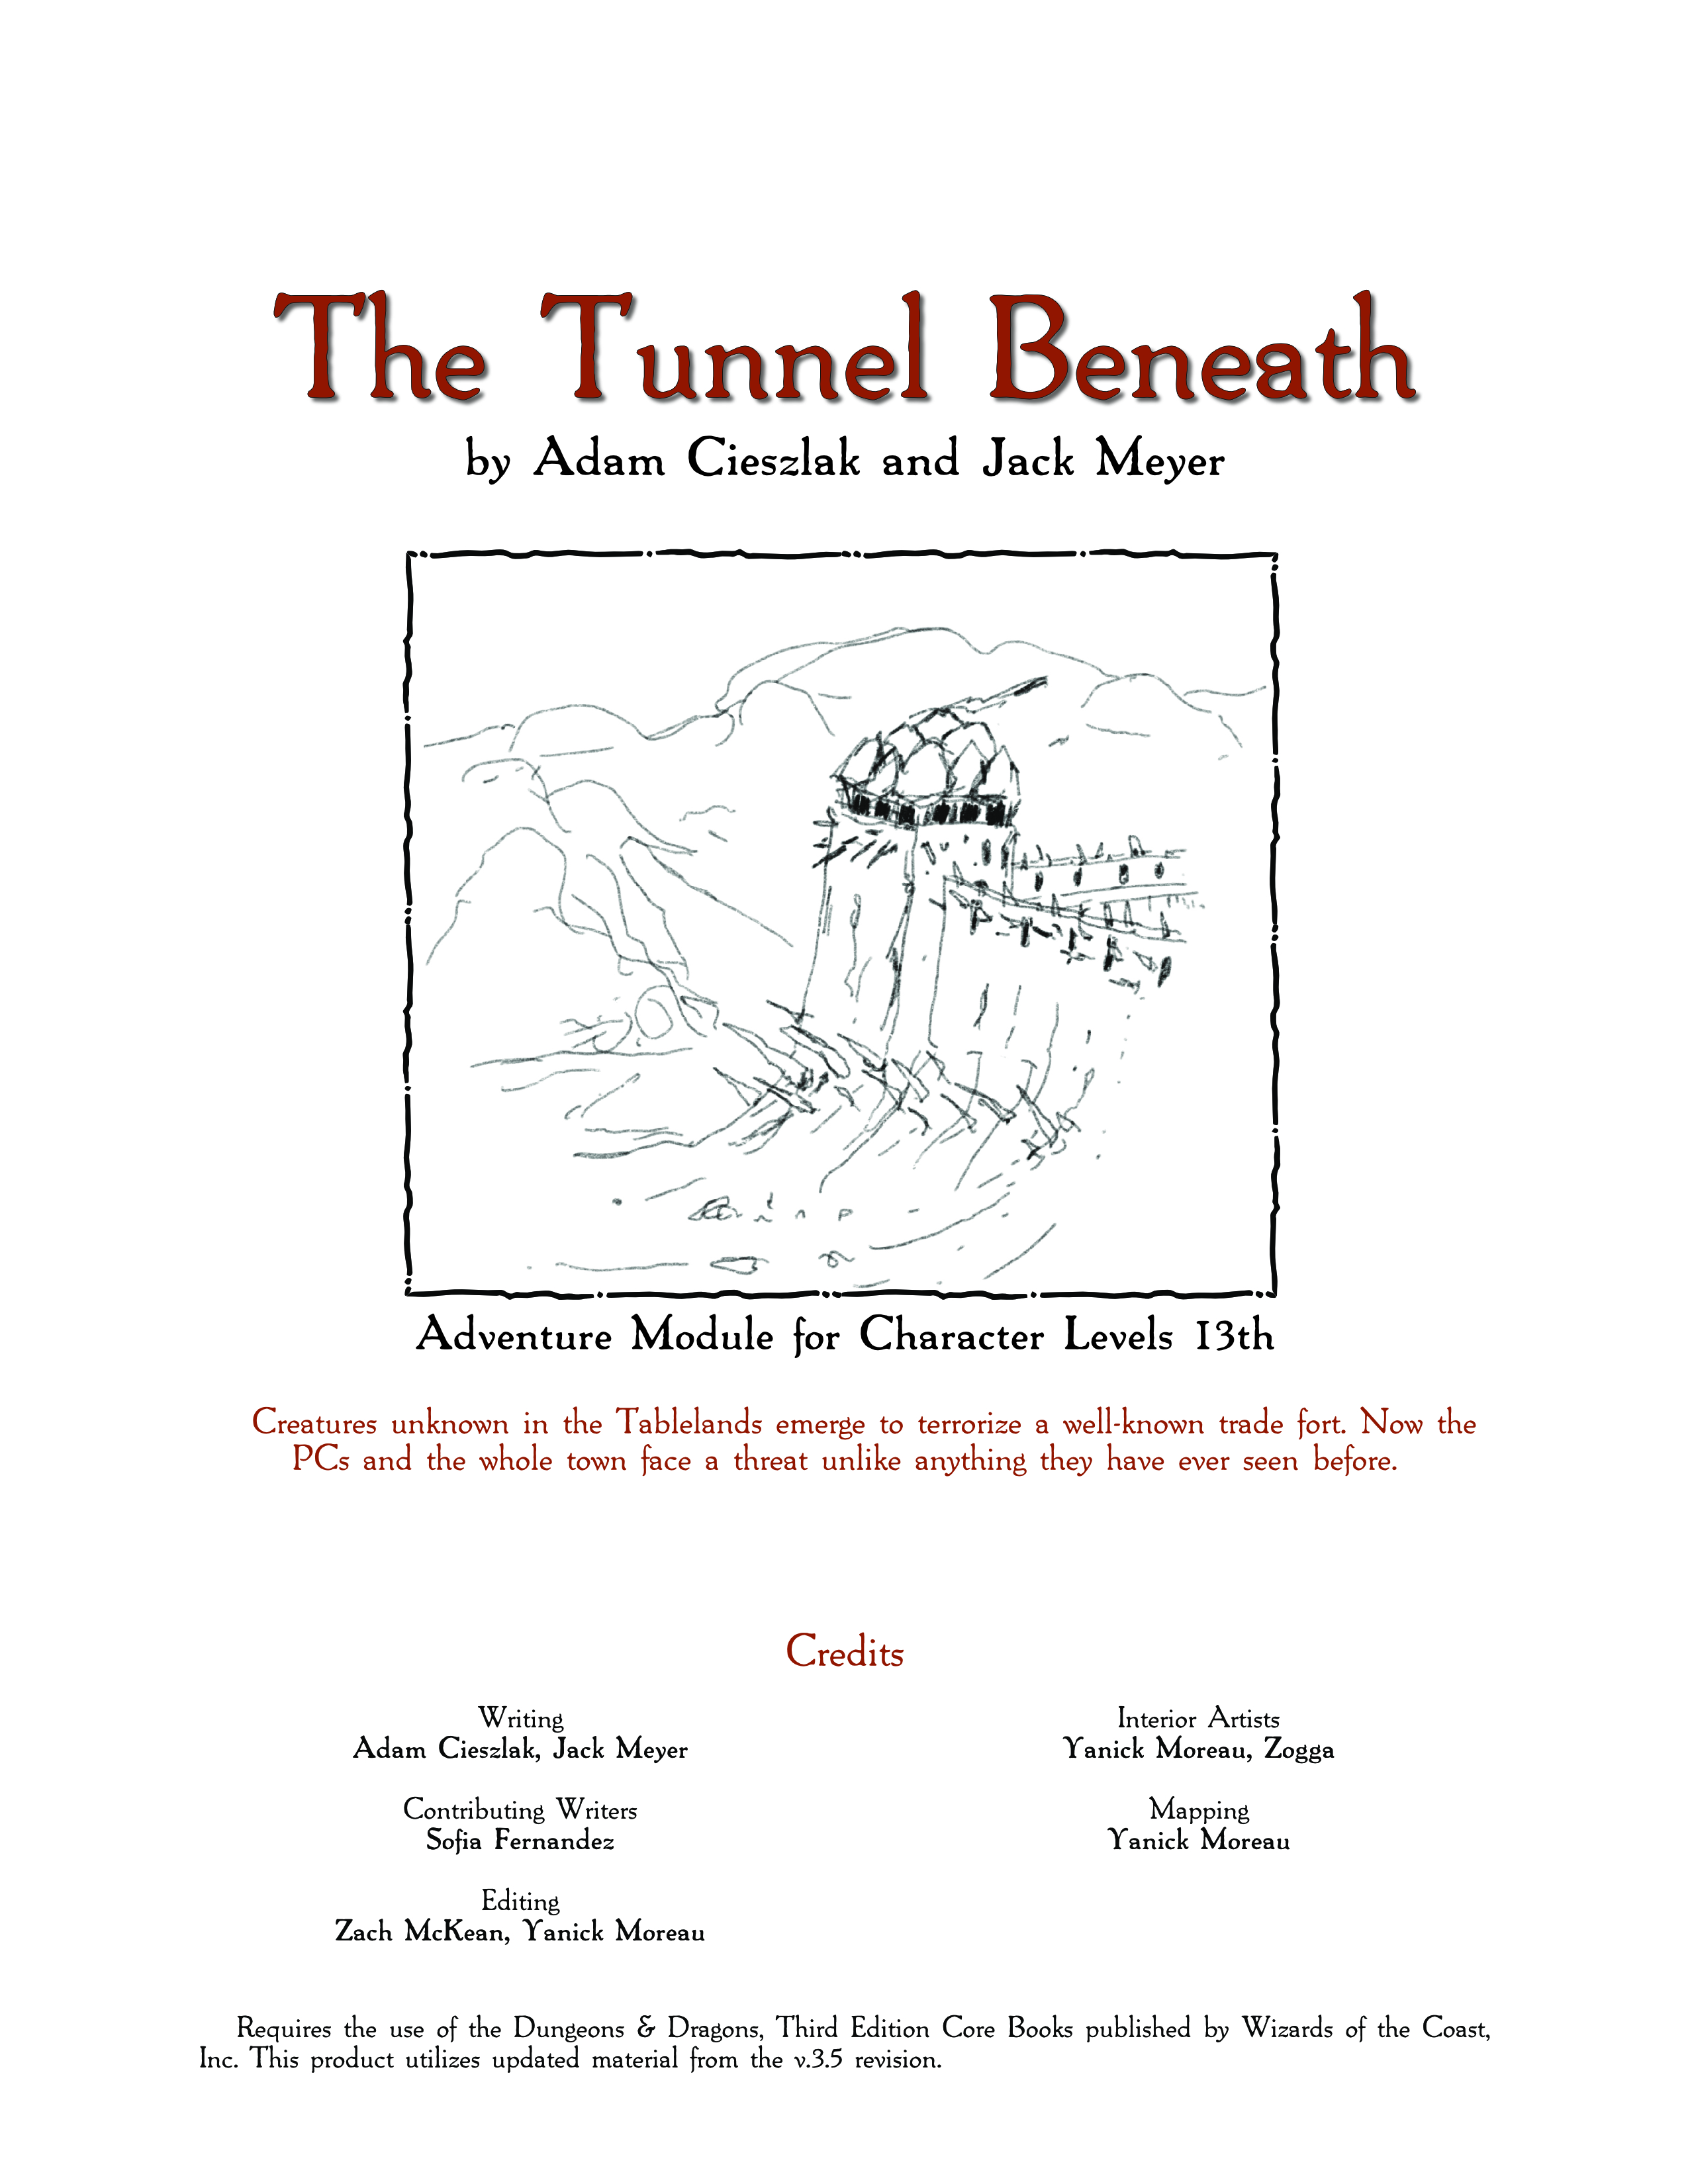 Adventure cover page for "The Tunnel Beneath"